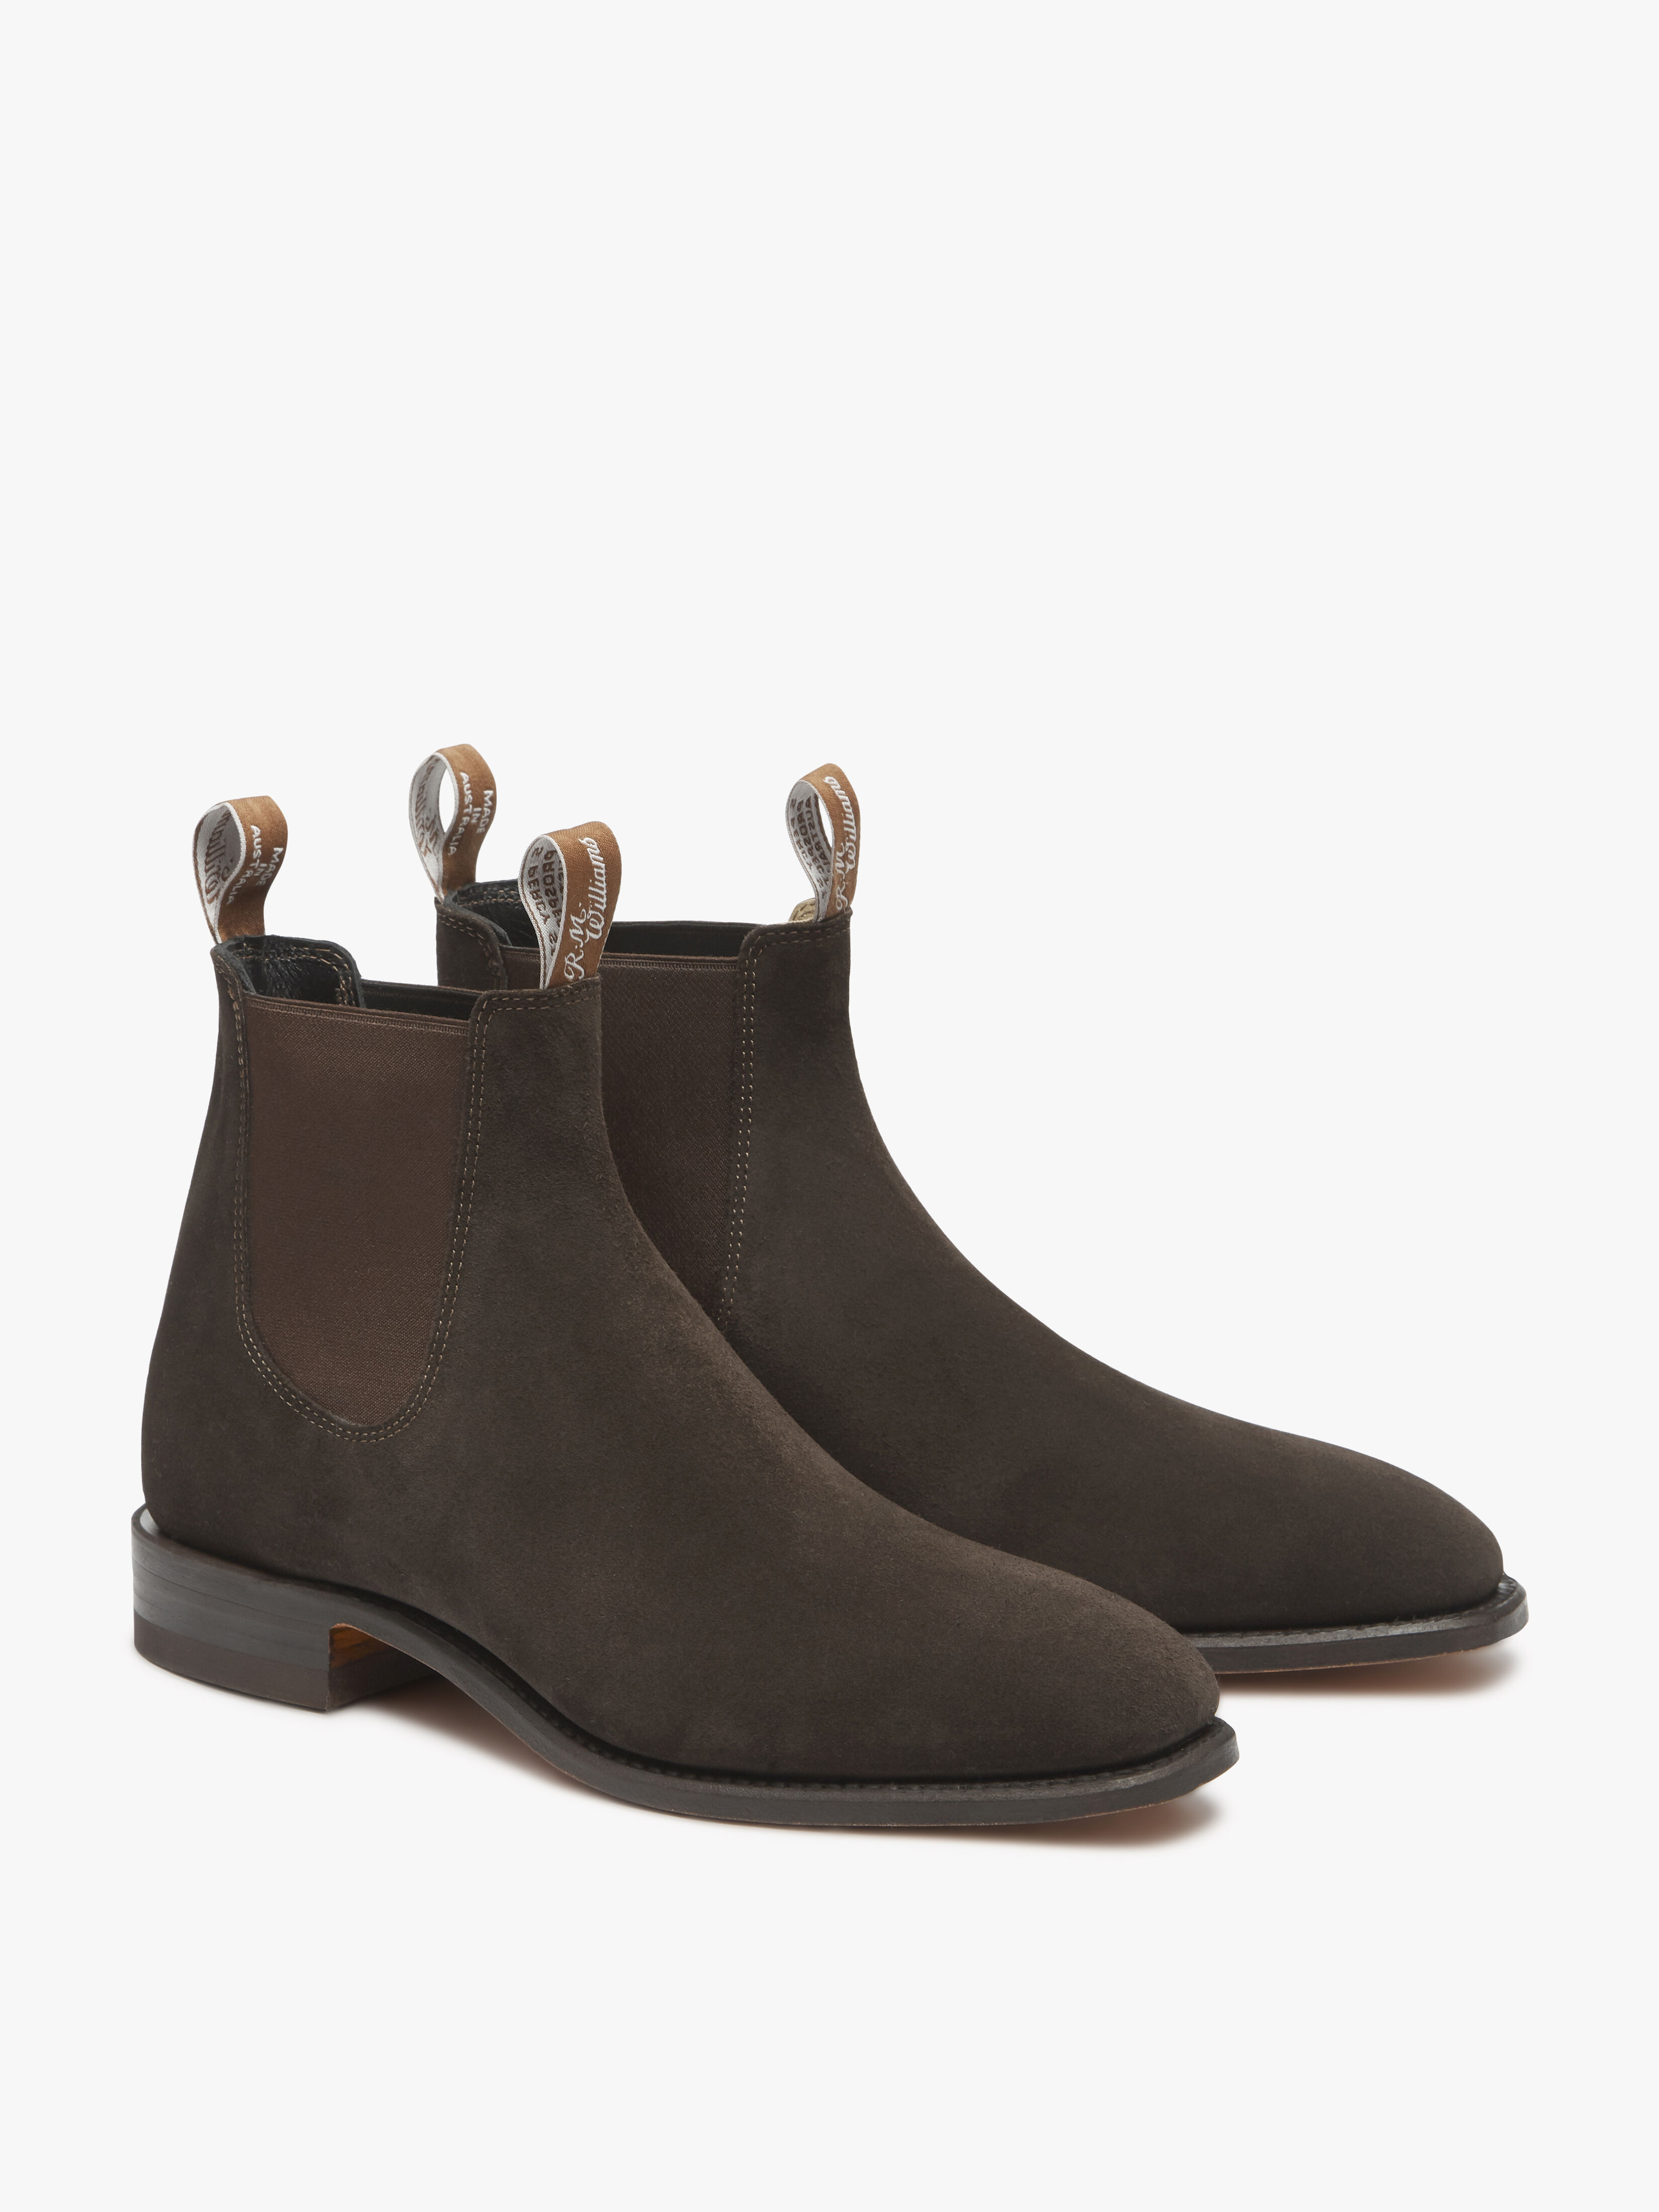 Craftsman Boot - Suede Leather 